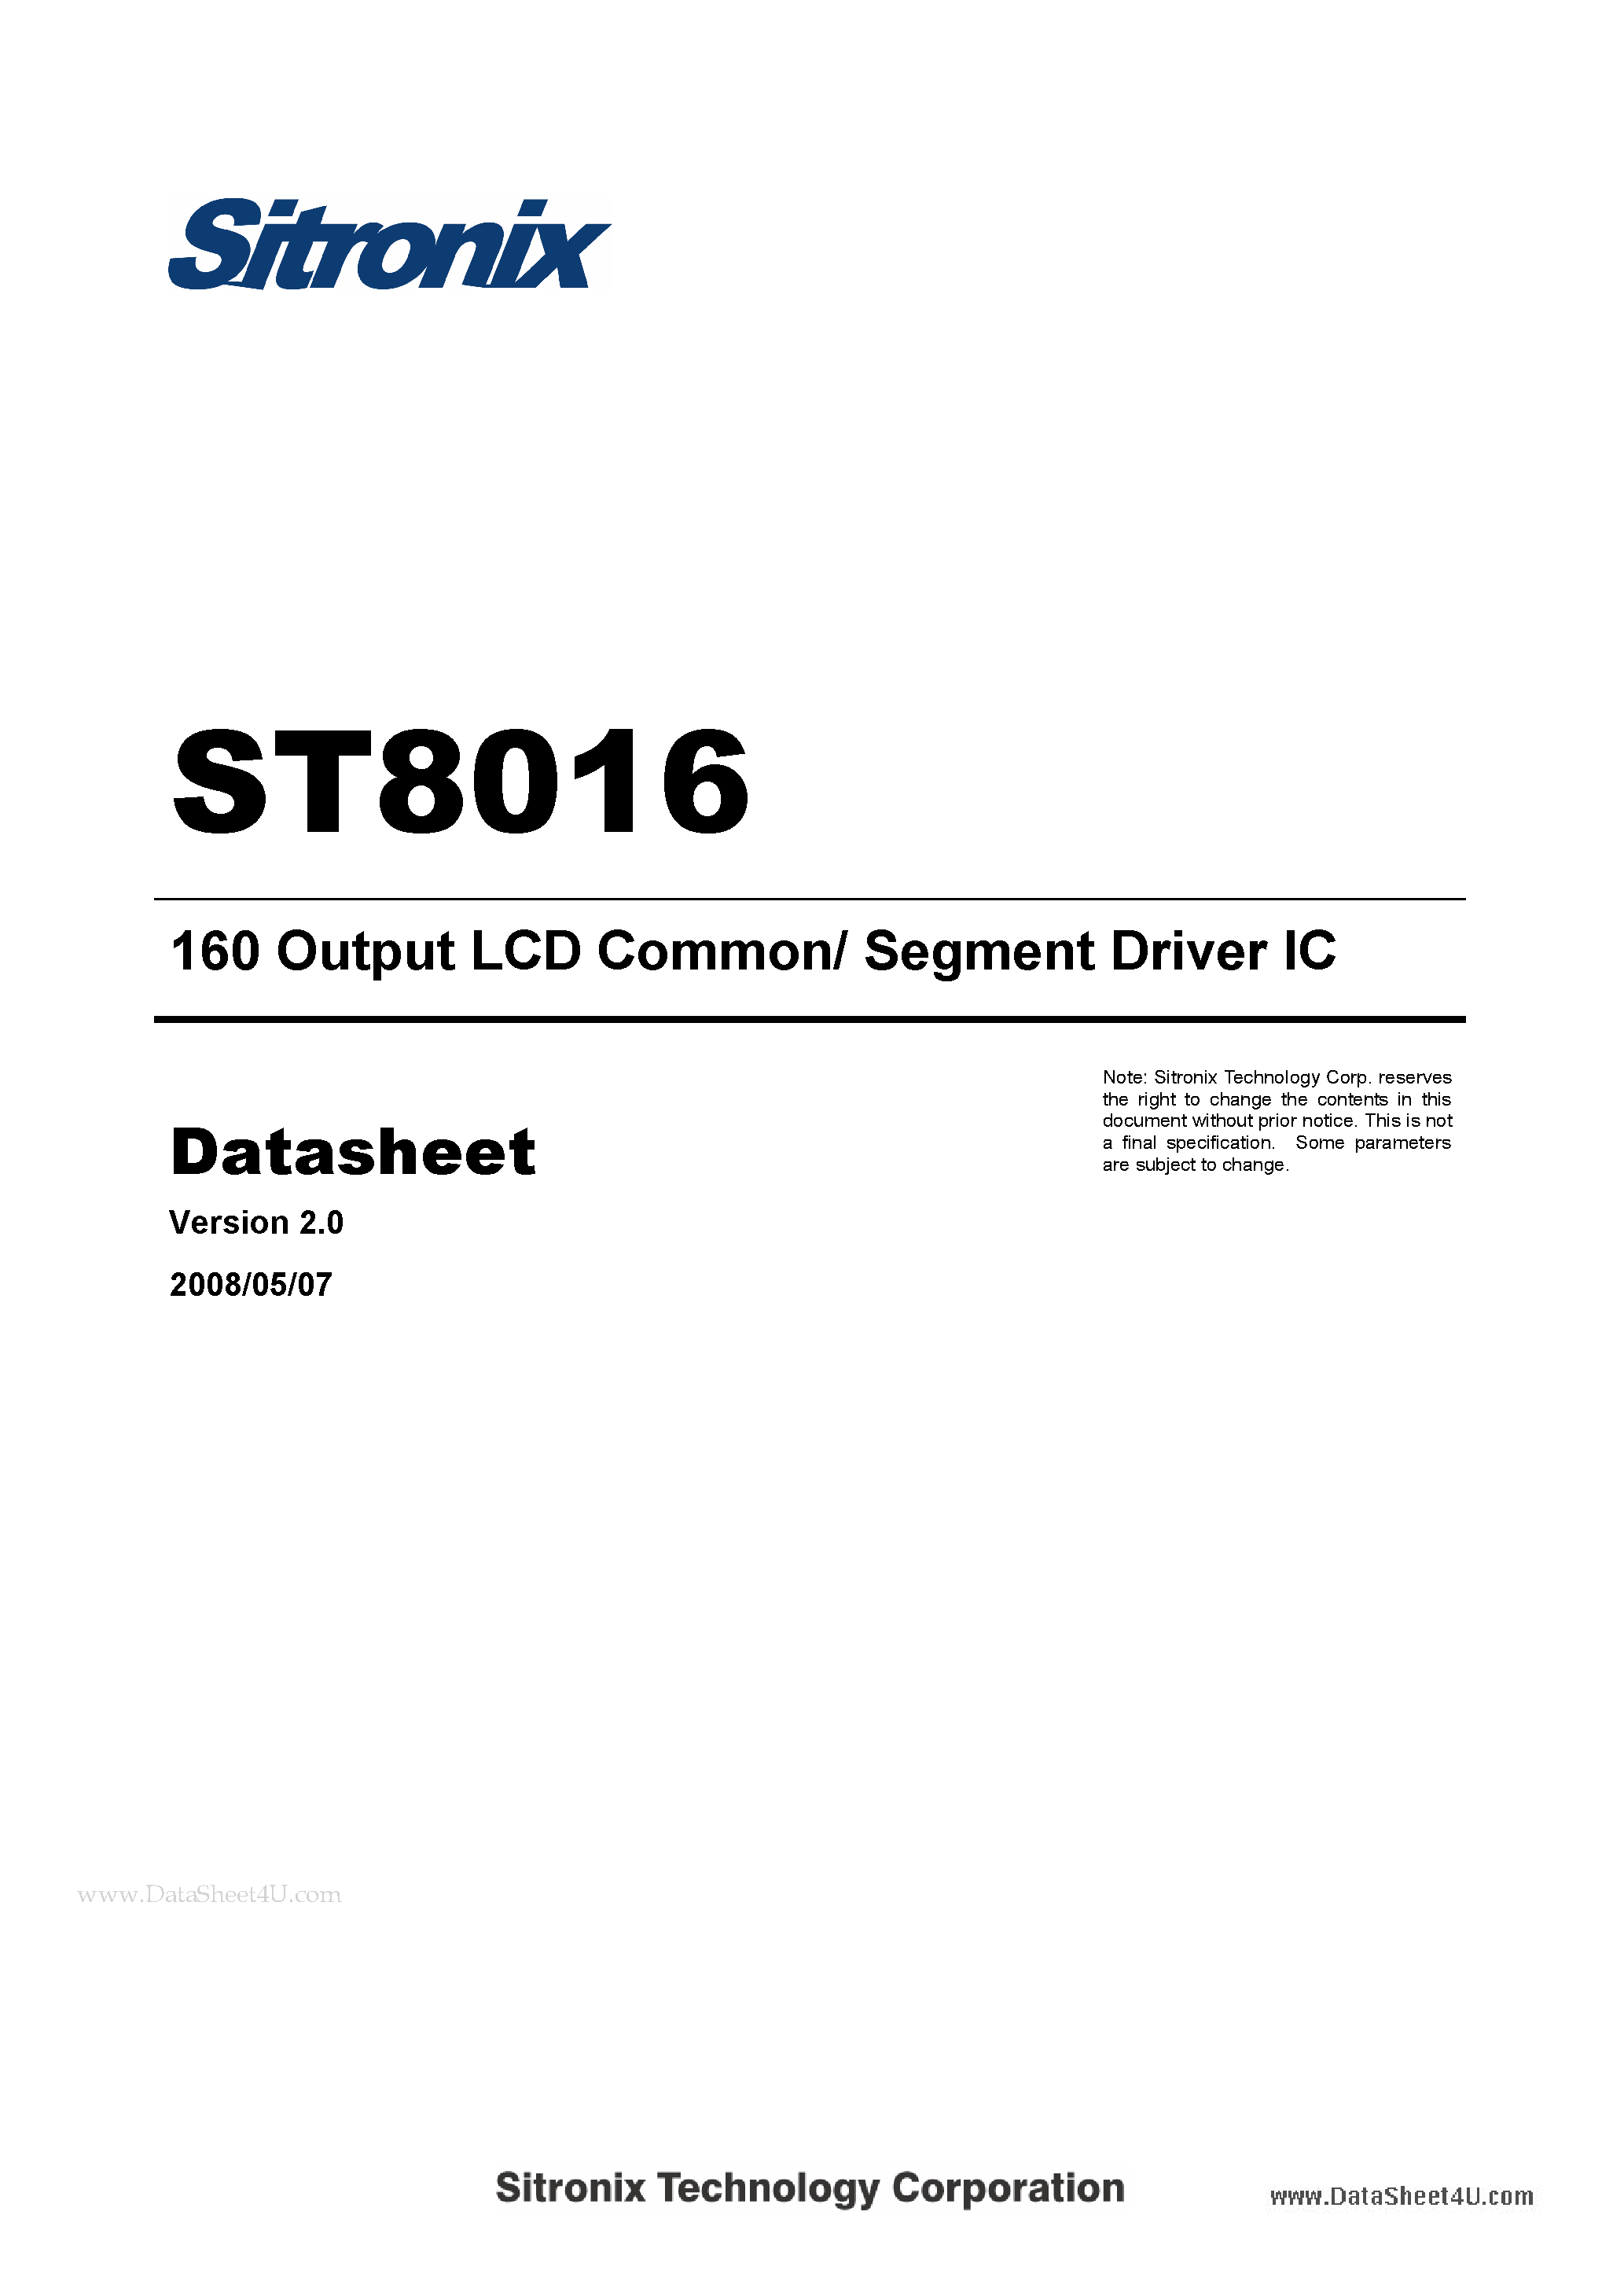 Datasheet ST8016 - 160 Output LCD Common/ Segment Driver IC page 1